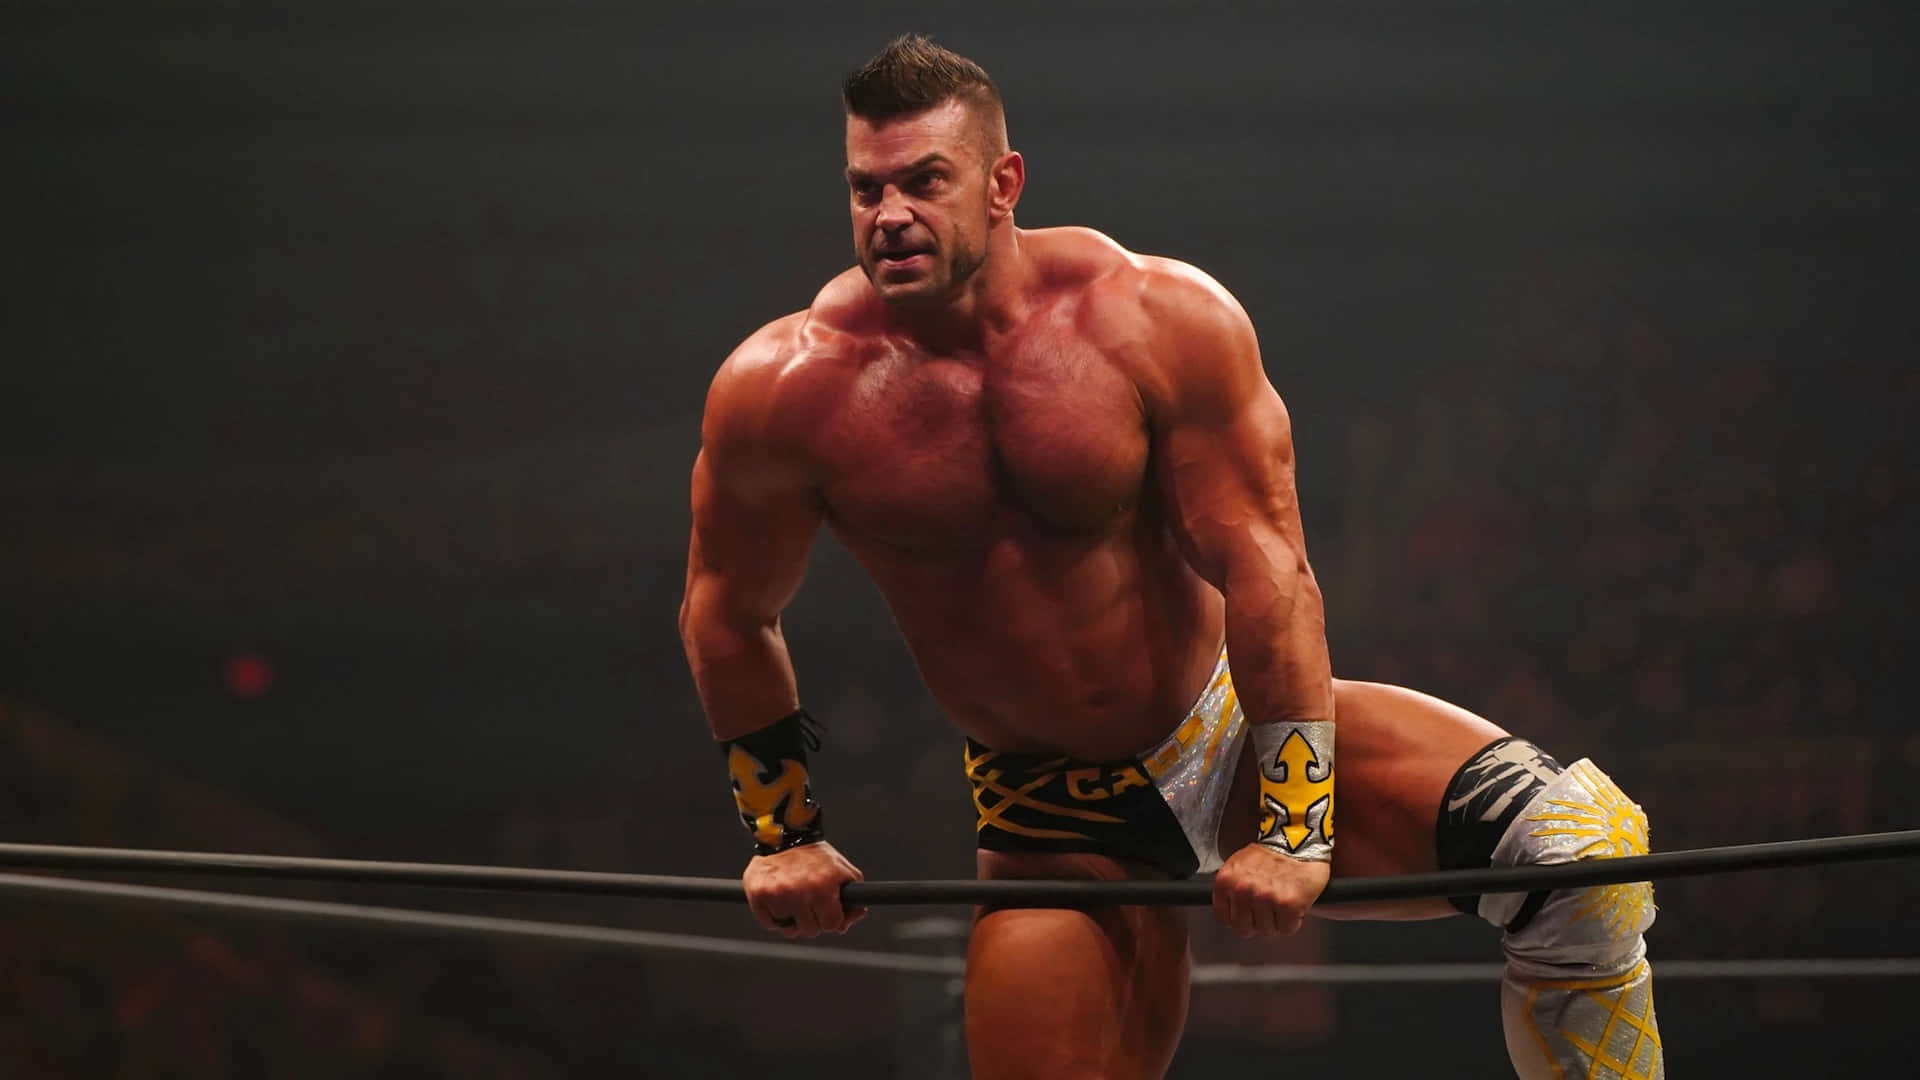 Brian Cage Exhibiting Power in the Wrestling Ring Wallpaper